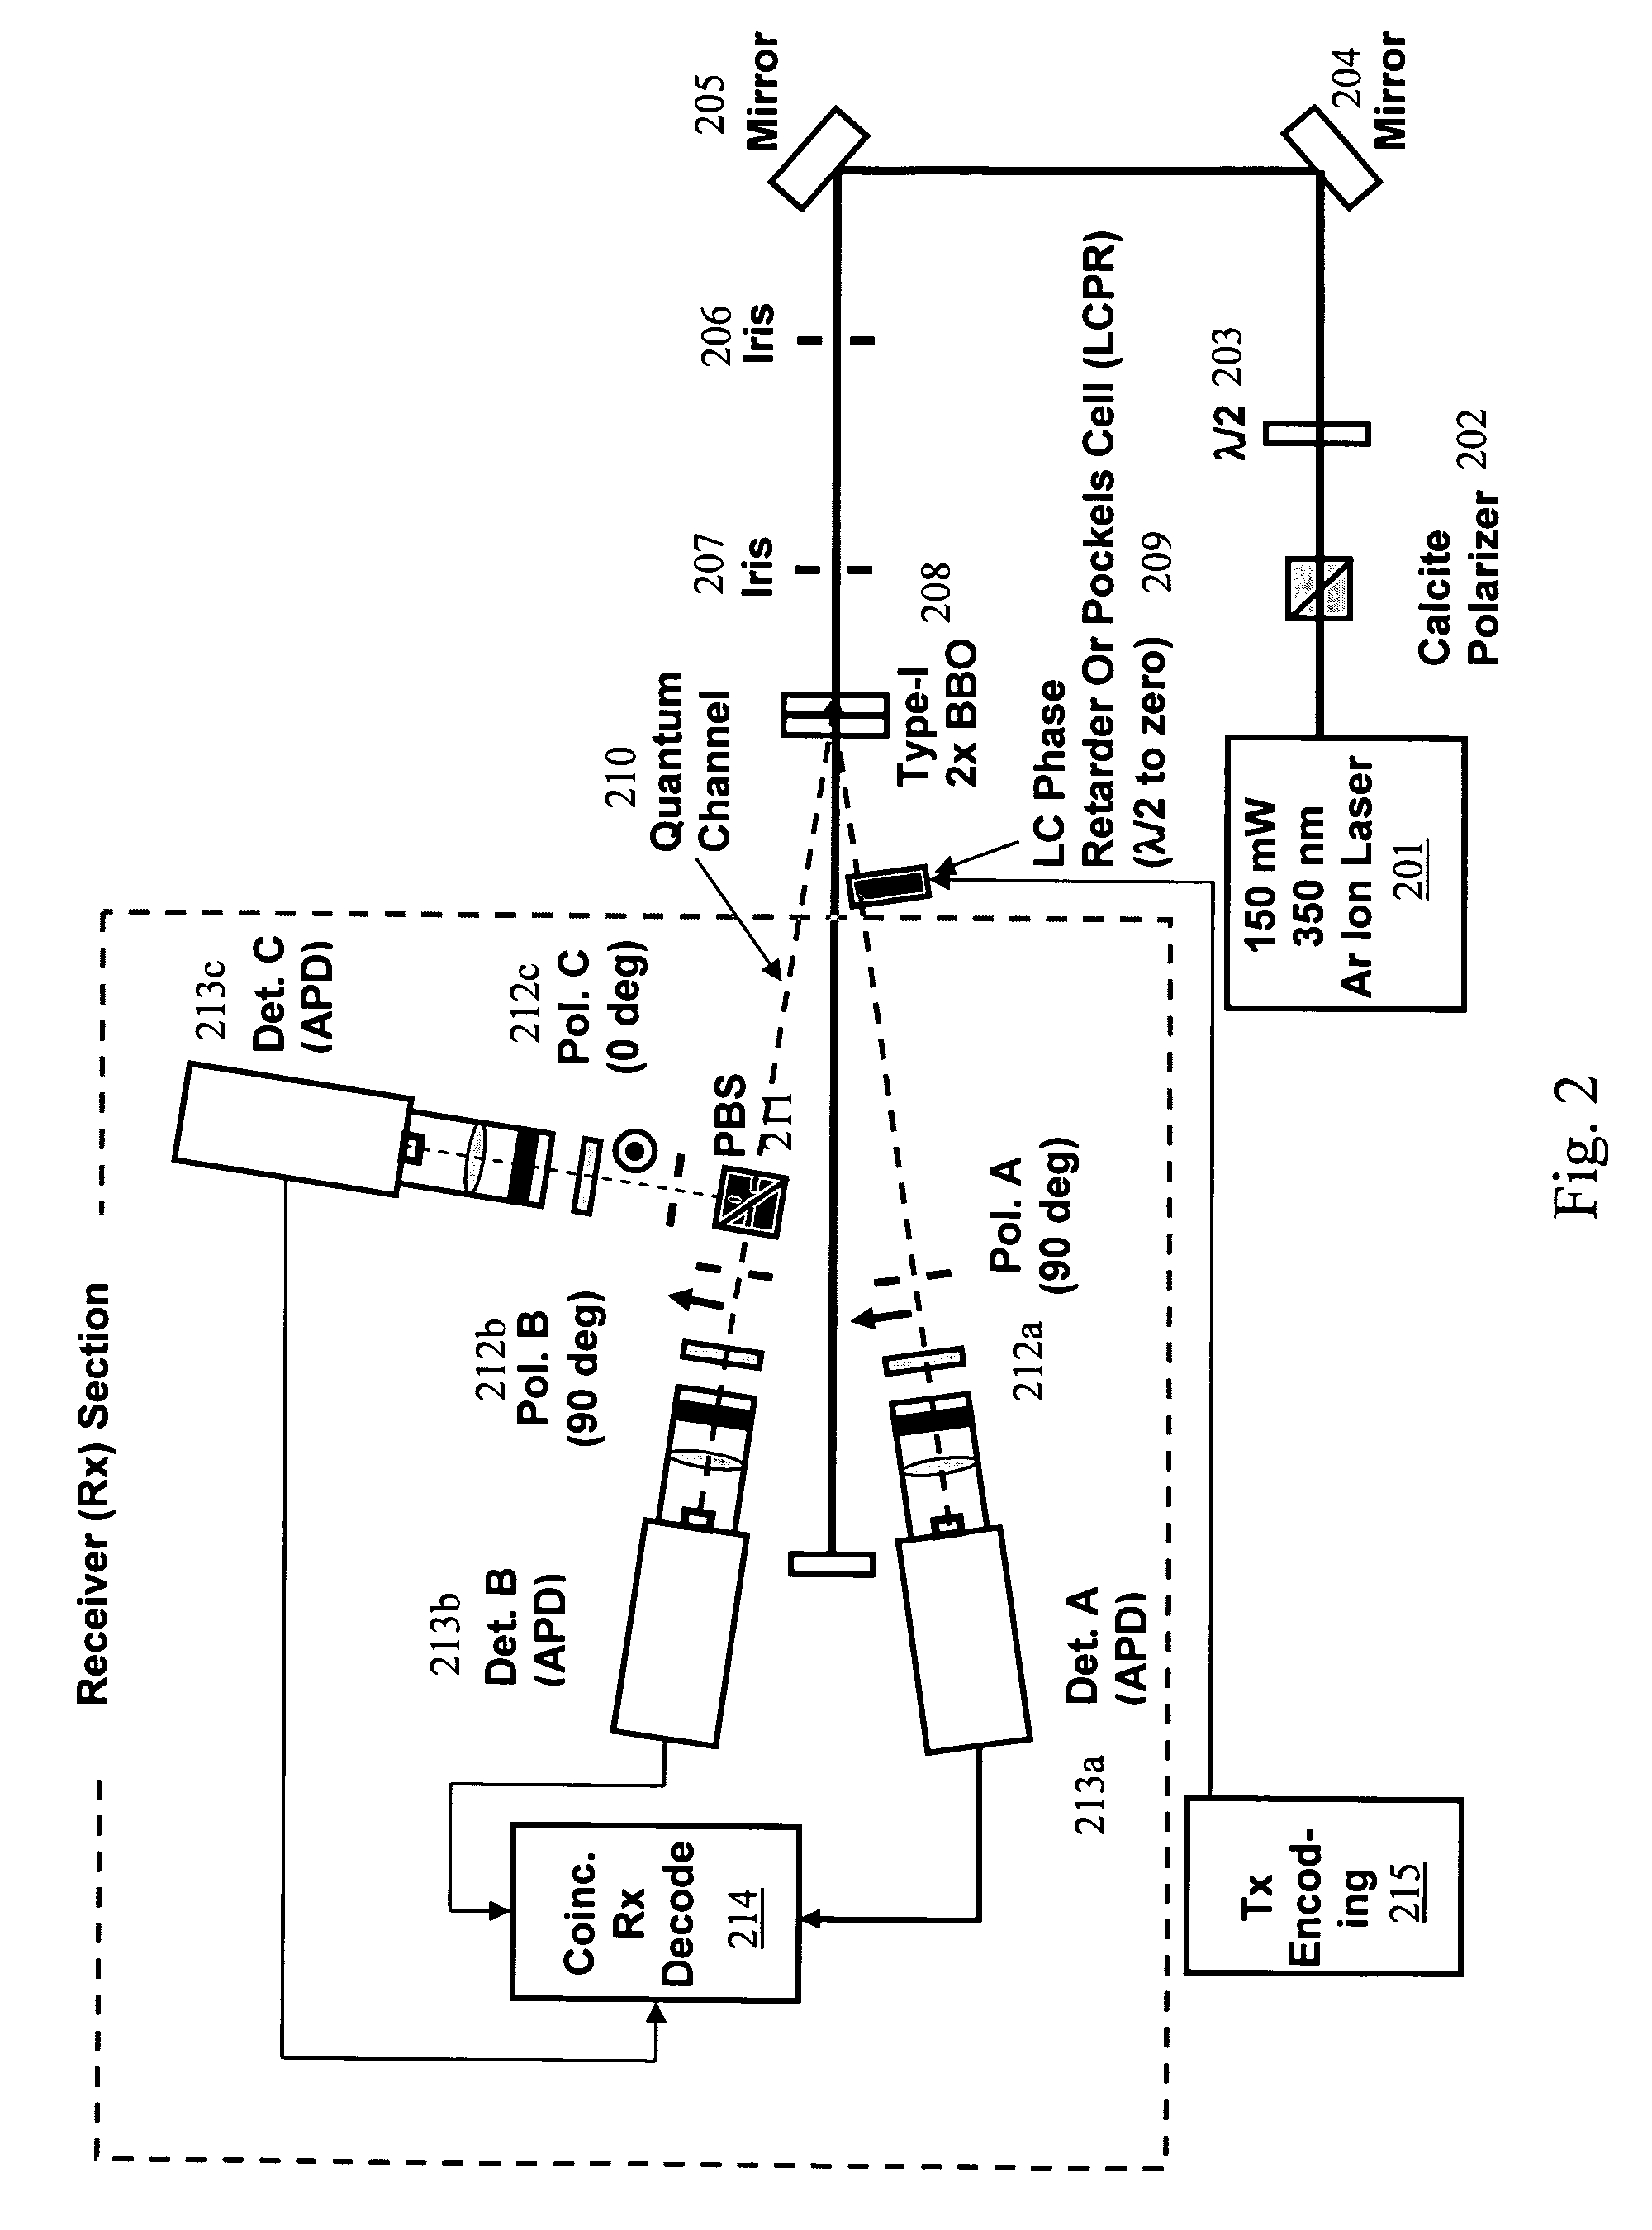 Multi-wavelength time-coincident optical communications system and methods thereof